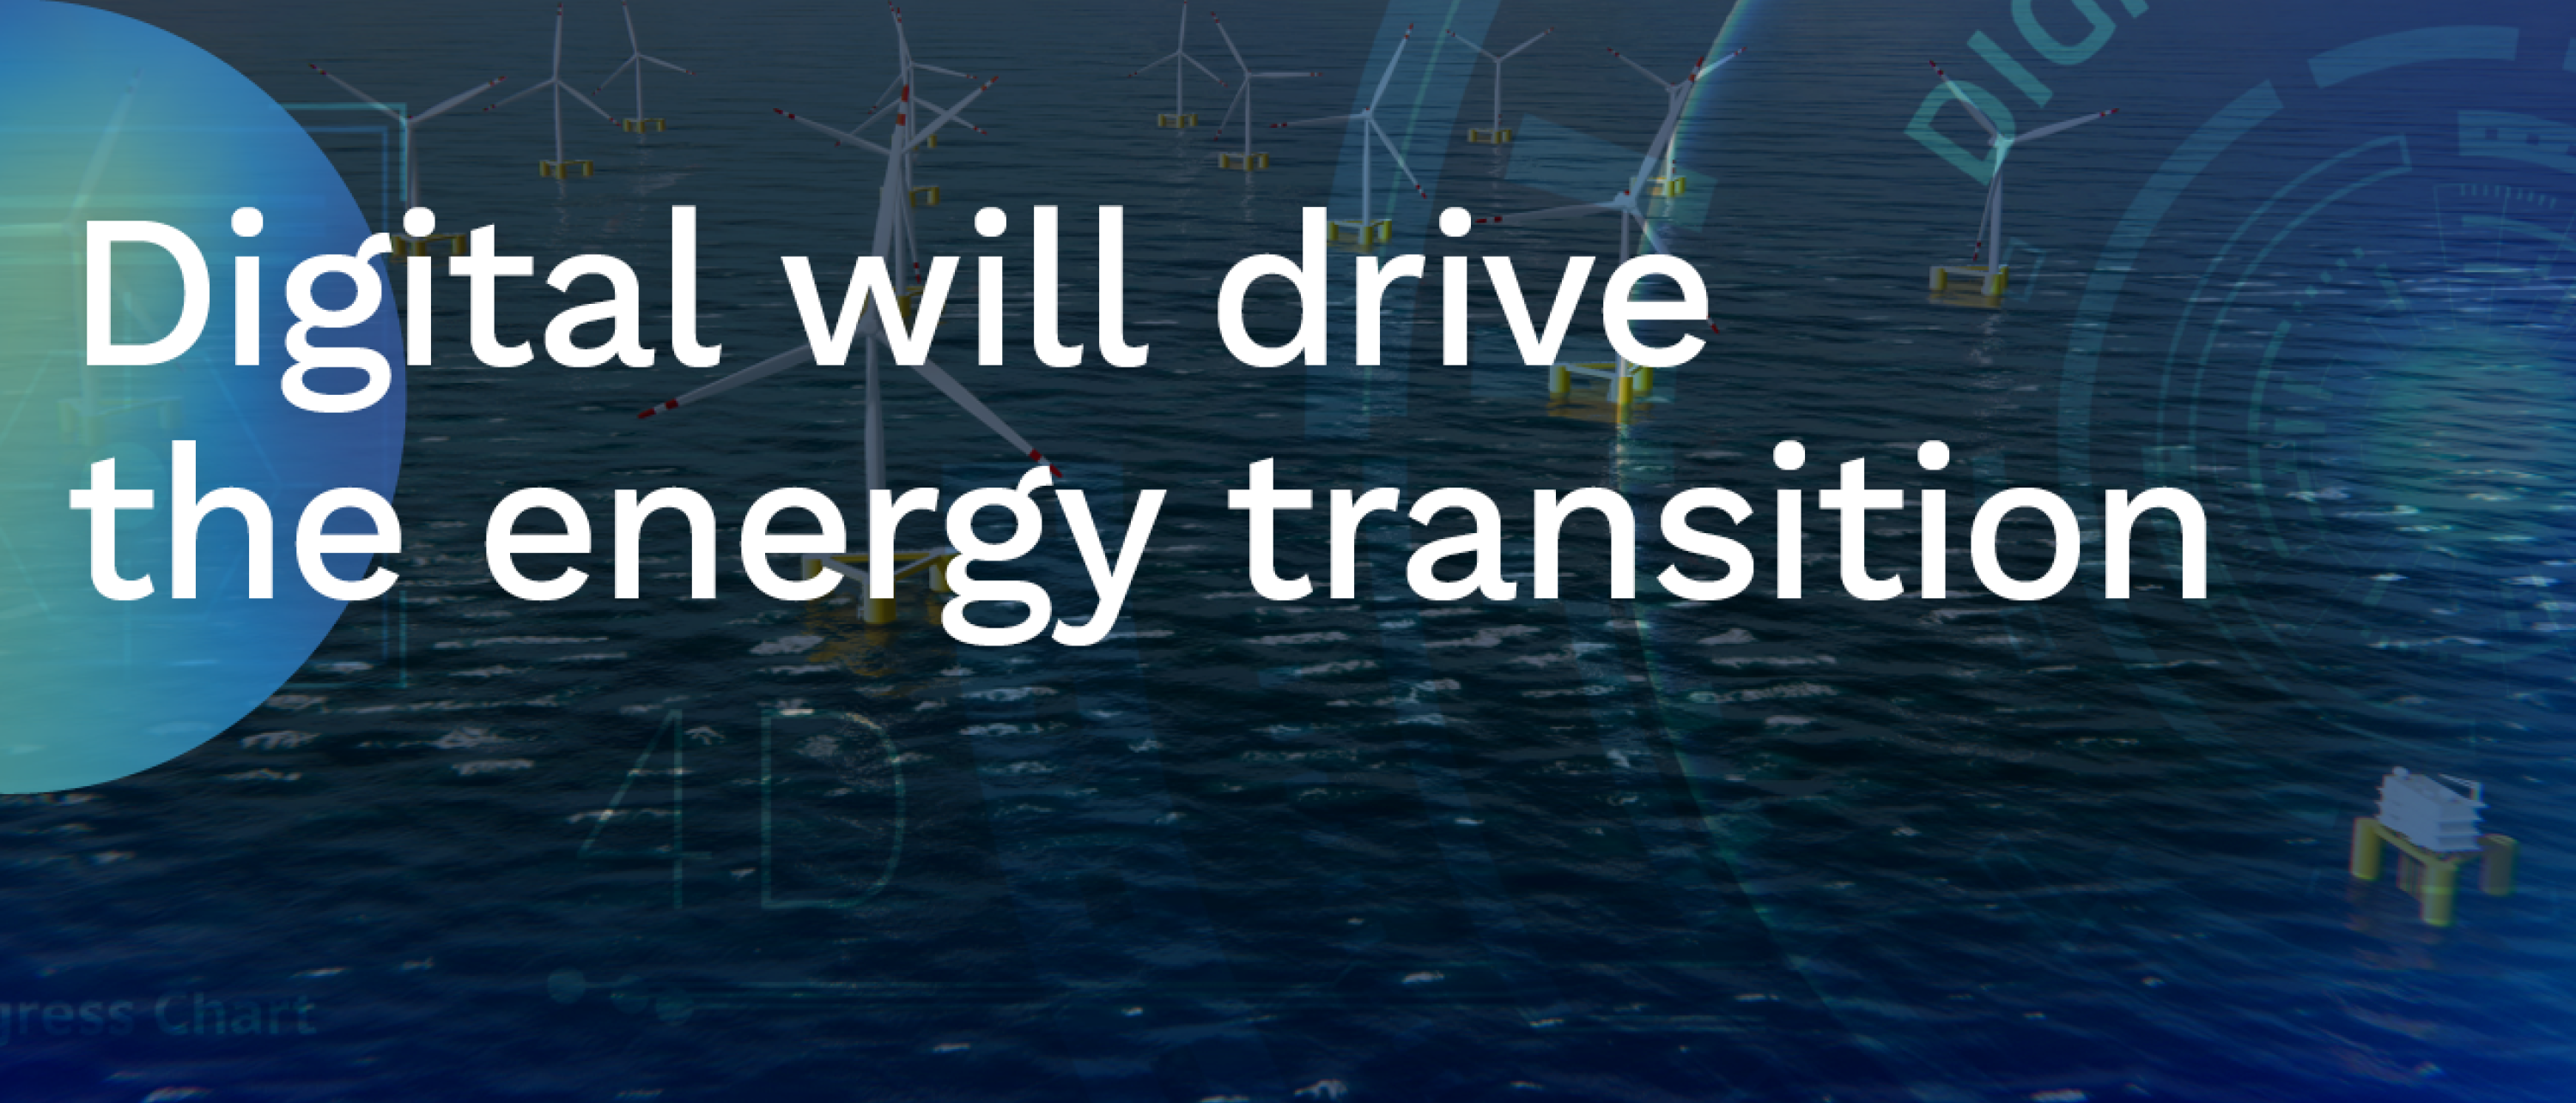 Digital will drive the energy transition image